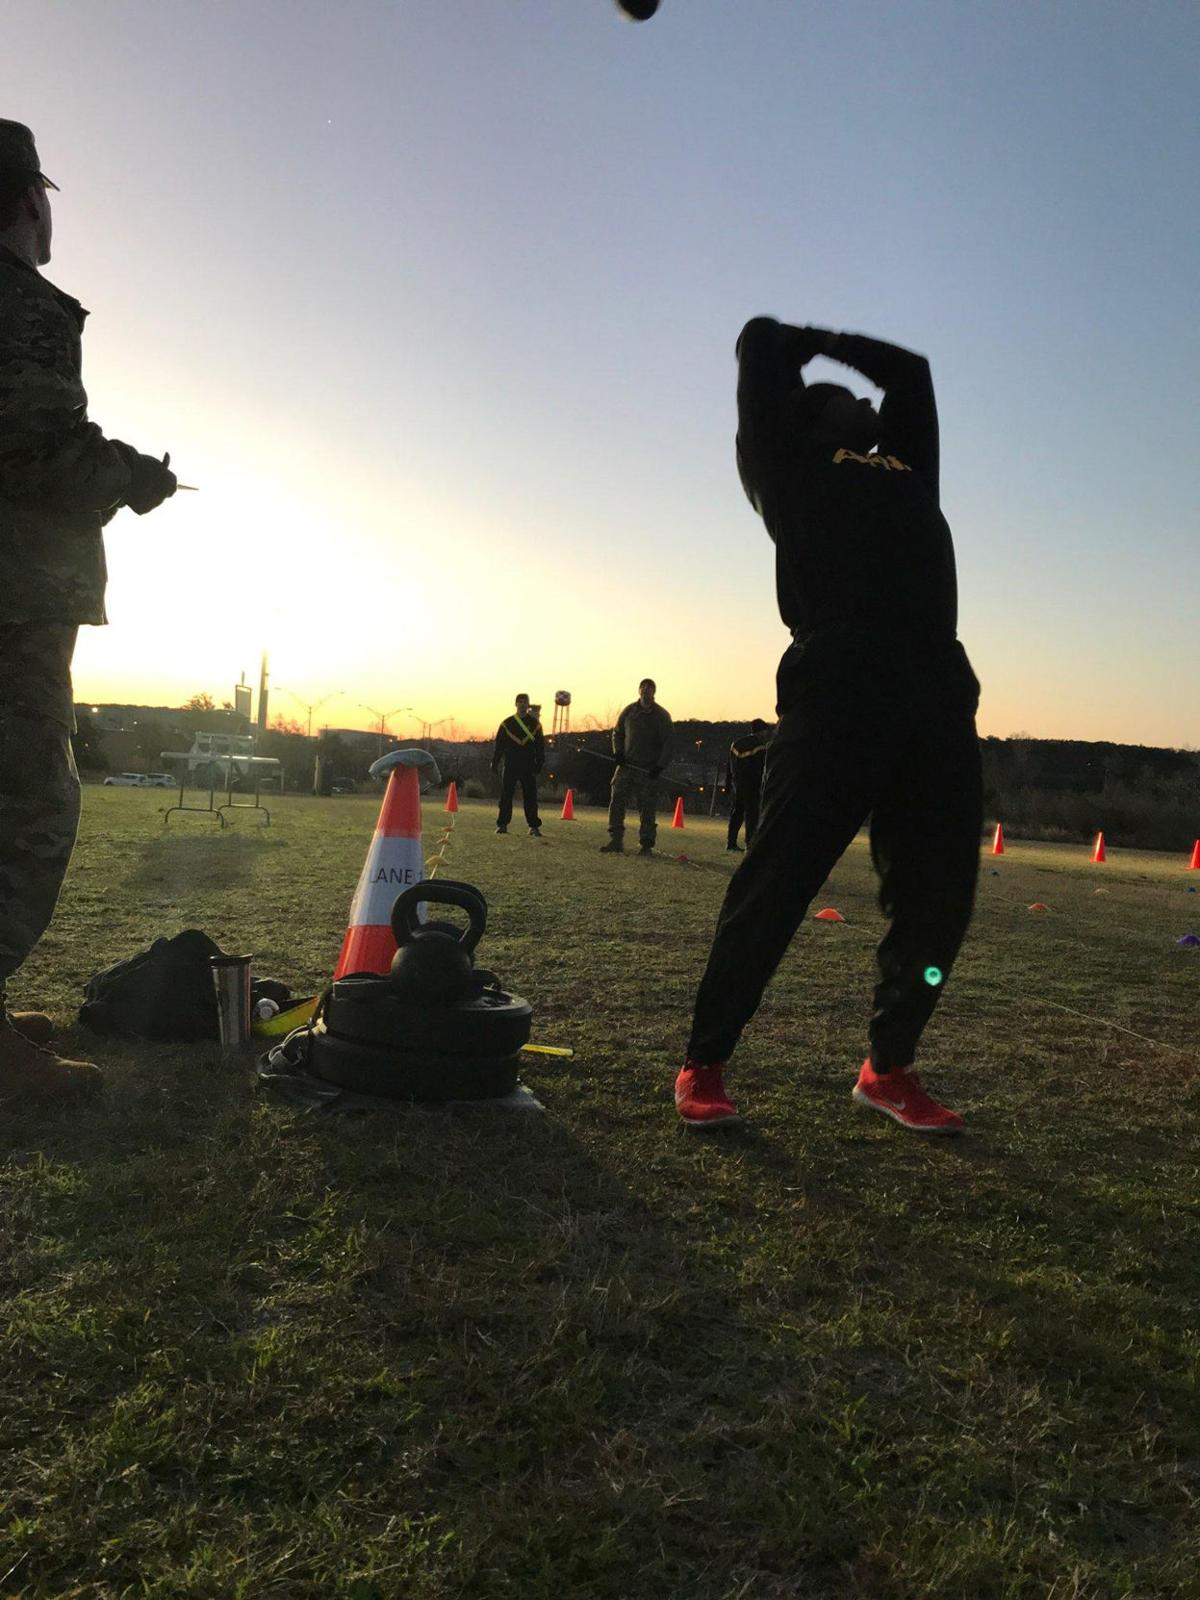 Army Combat Fitness Test